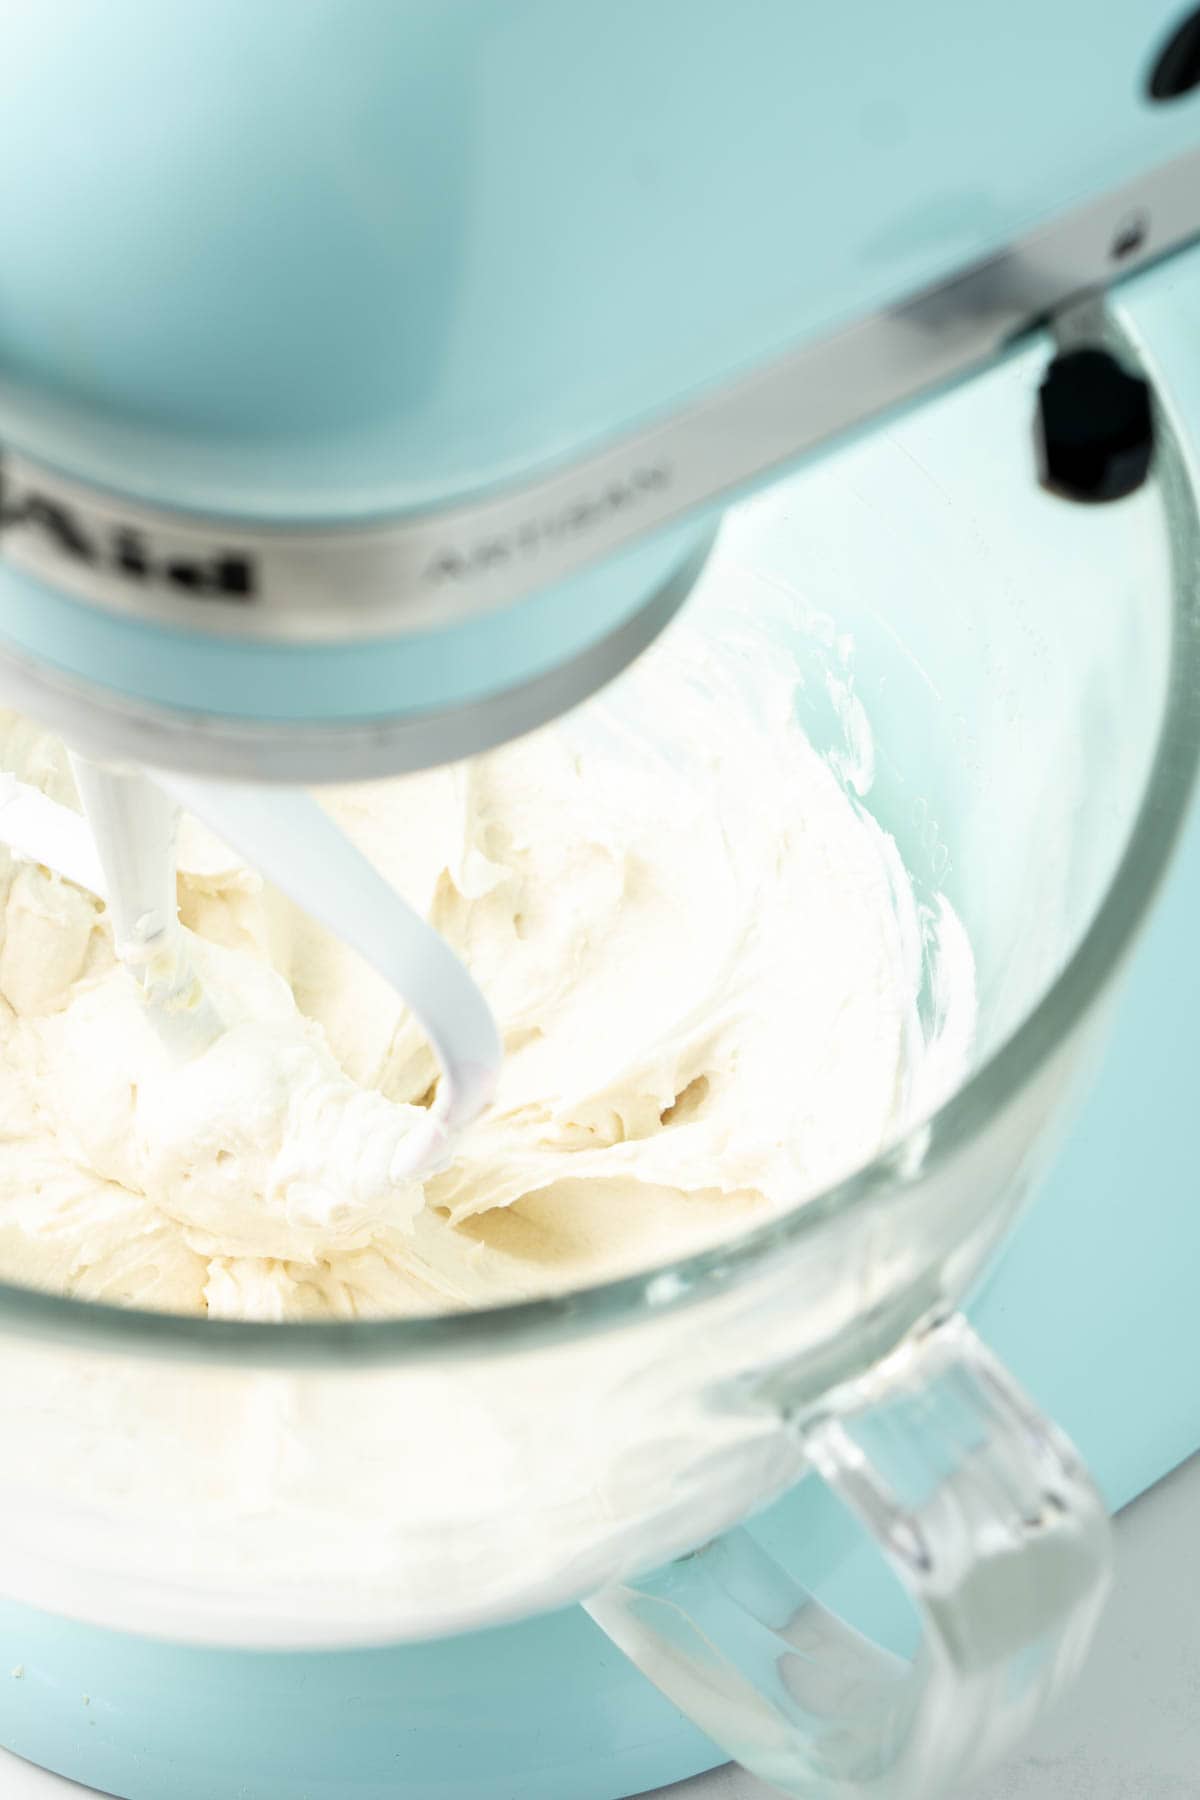 Kitchen aid stand mixer with creamy vegan cream cheese frosting.